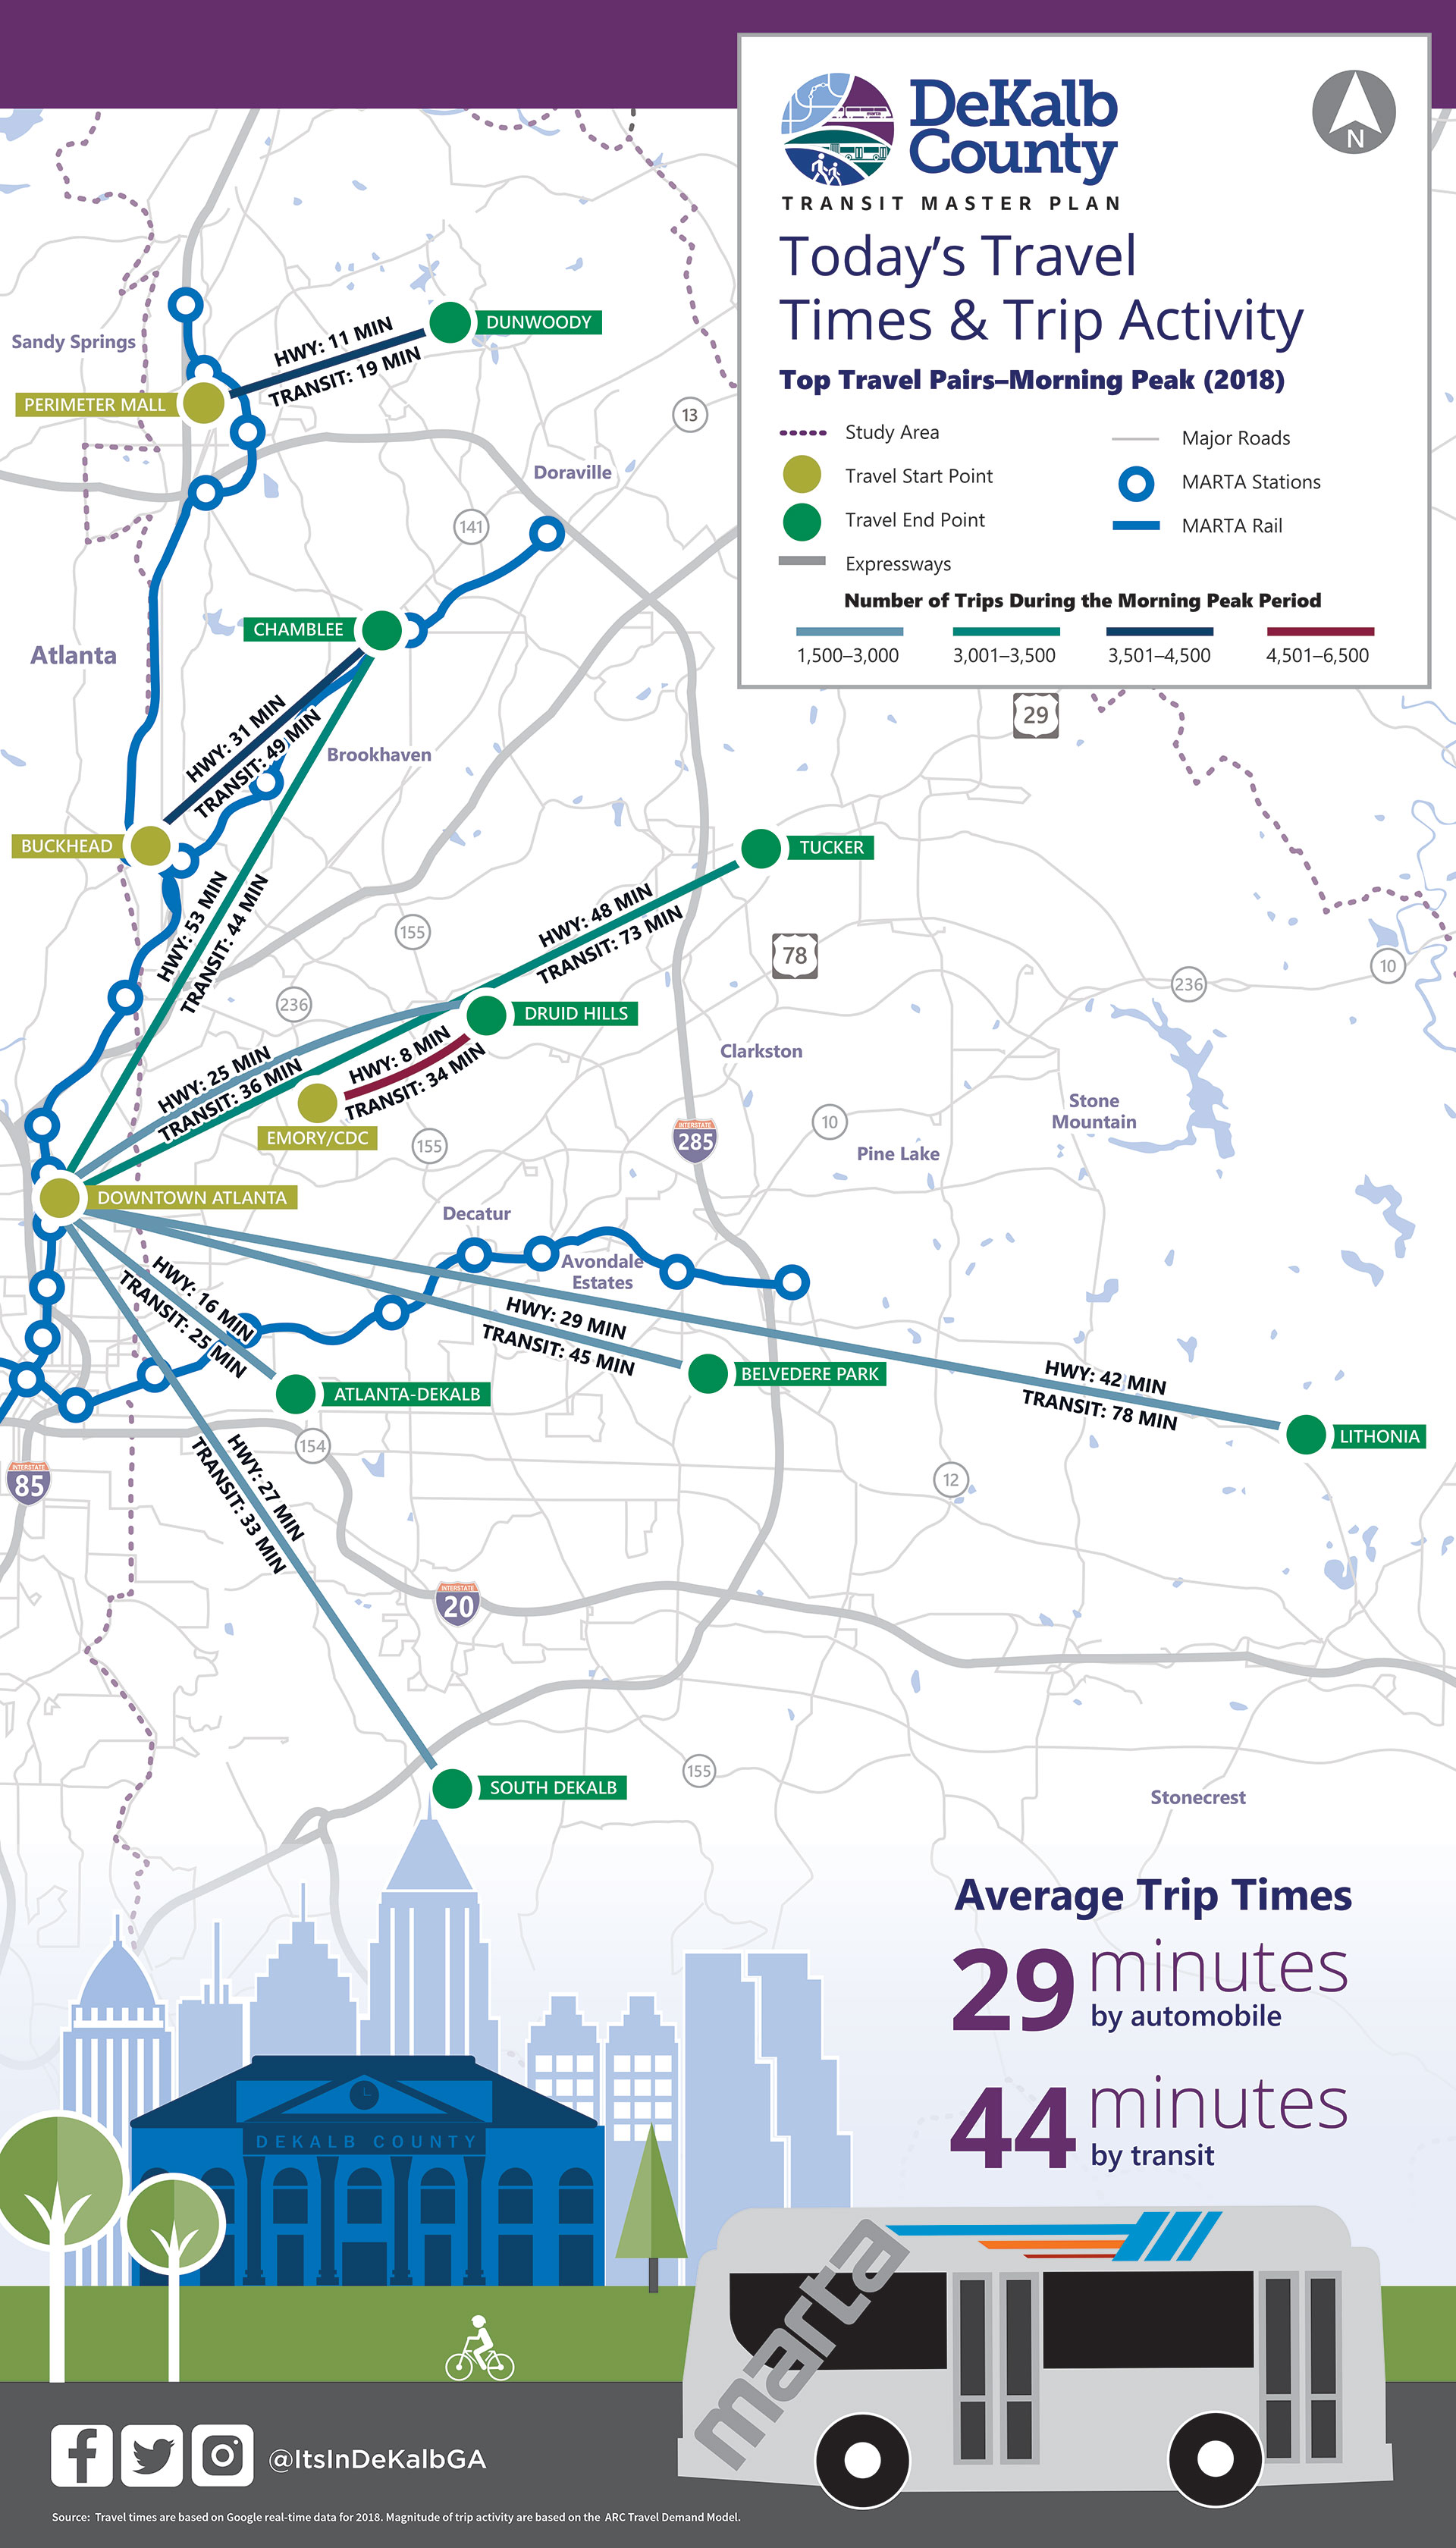 Tomorrow's Travel Times and Trip Activity